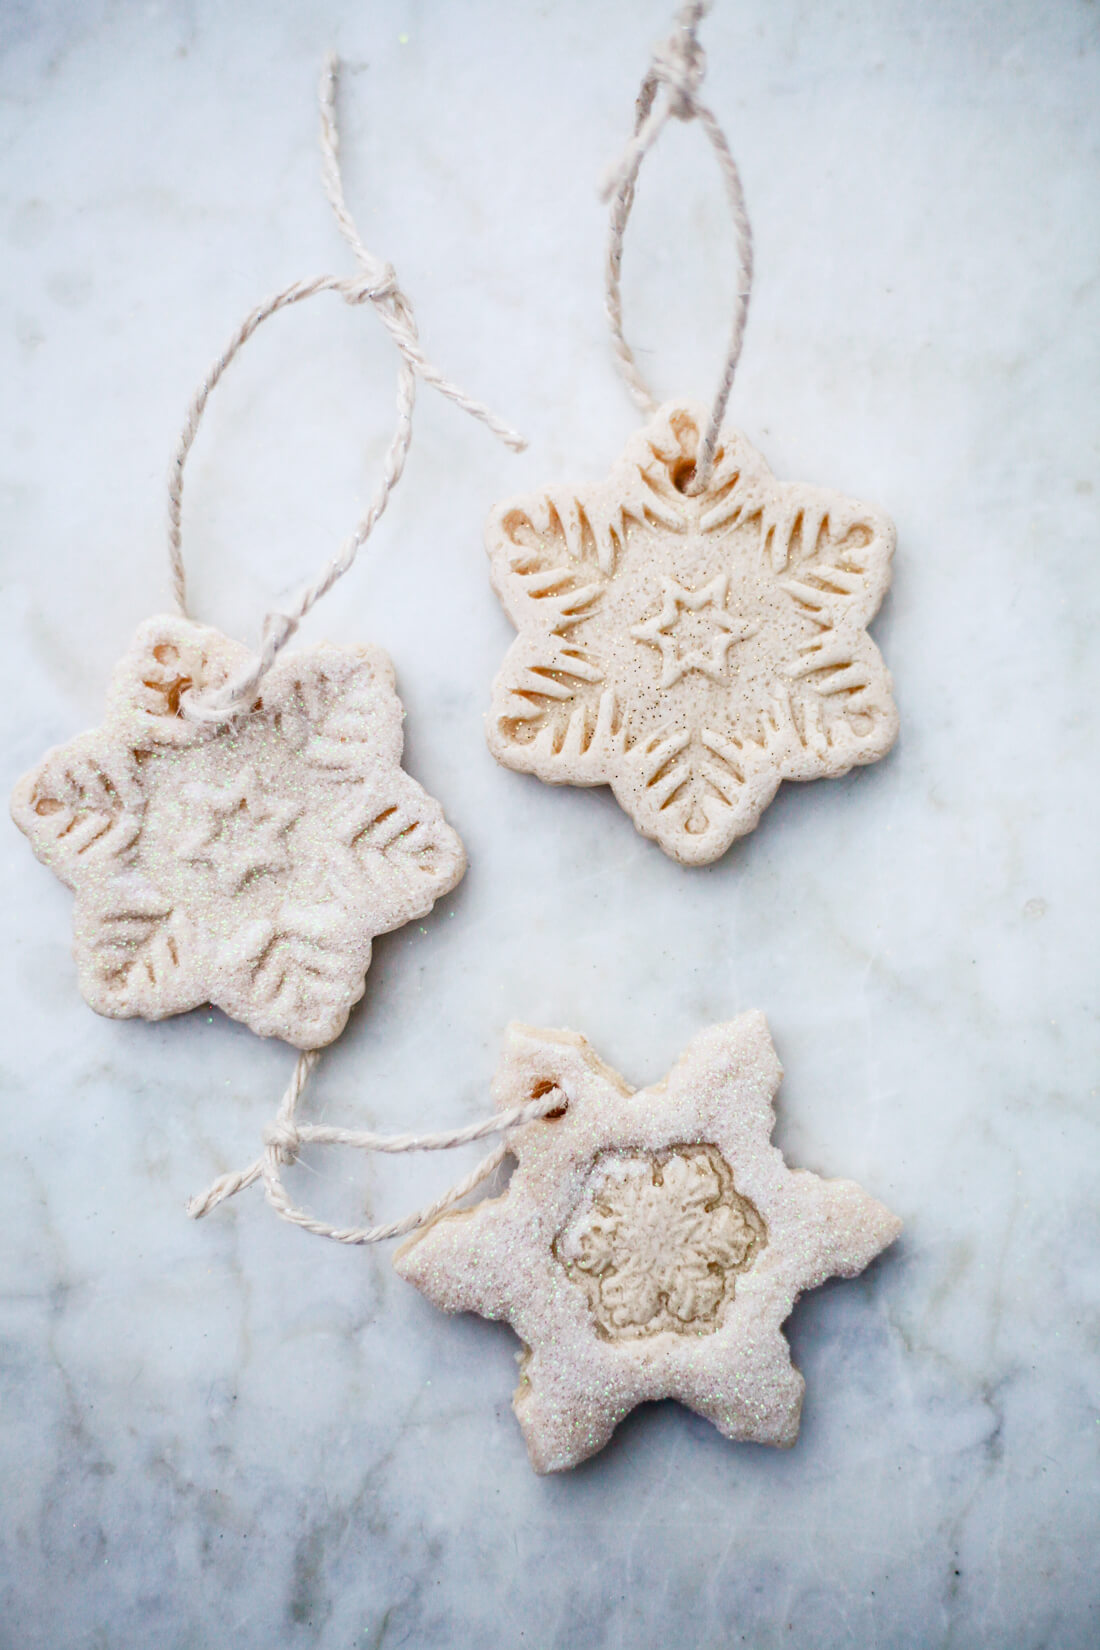 Three snowflake salt dough ornaments with twine hangers on a marble countertop.